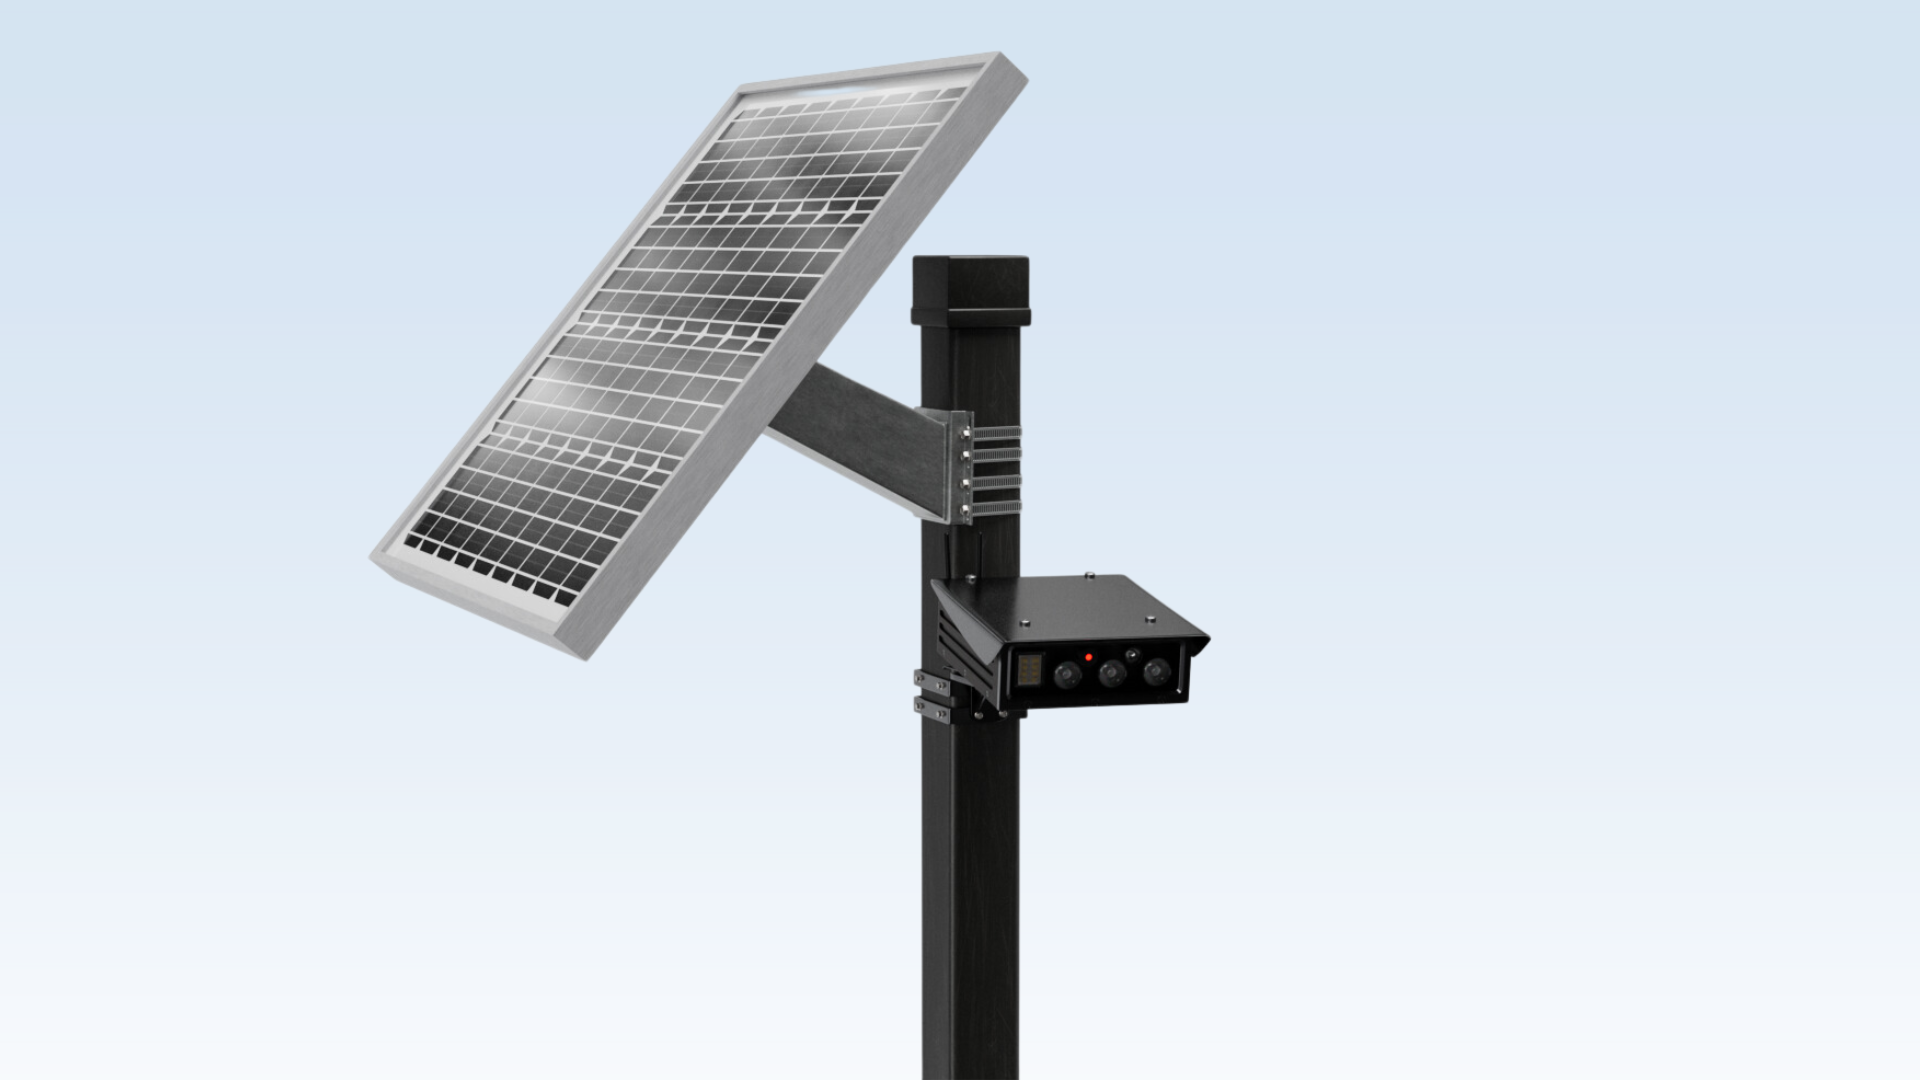 The MX Defender S uses top-of-the-line technology to accurately capture images 24/7. Designed to optimize LPR performance, the solar power capabilities make it easy to install almost anywhere.